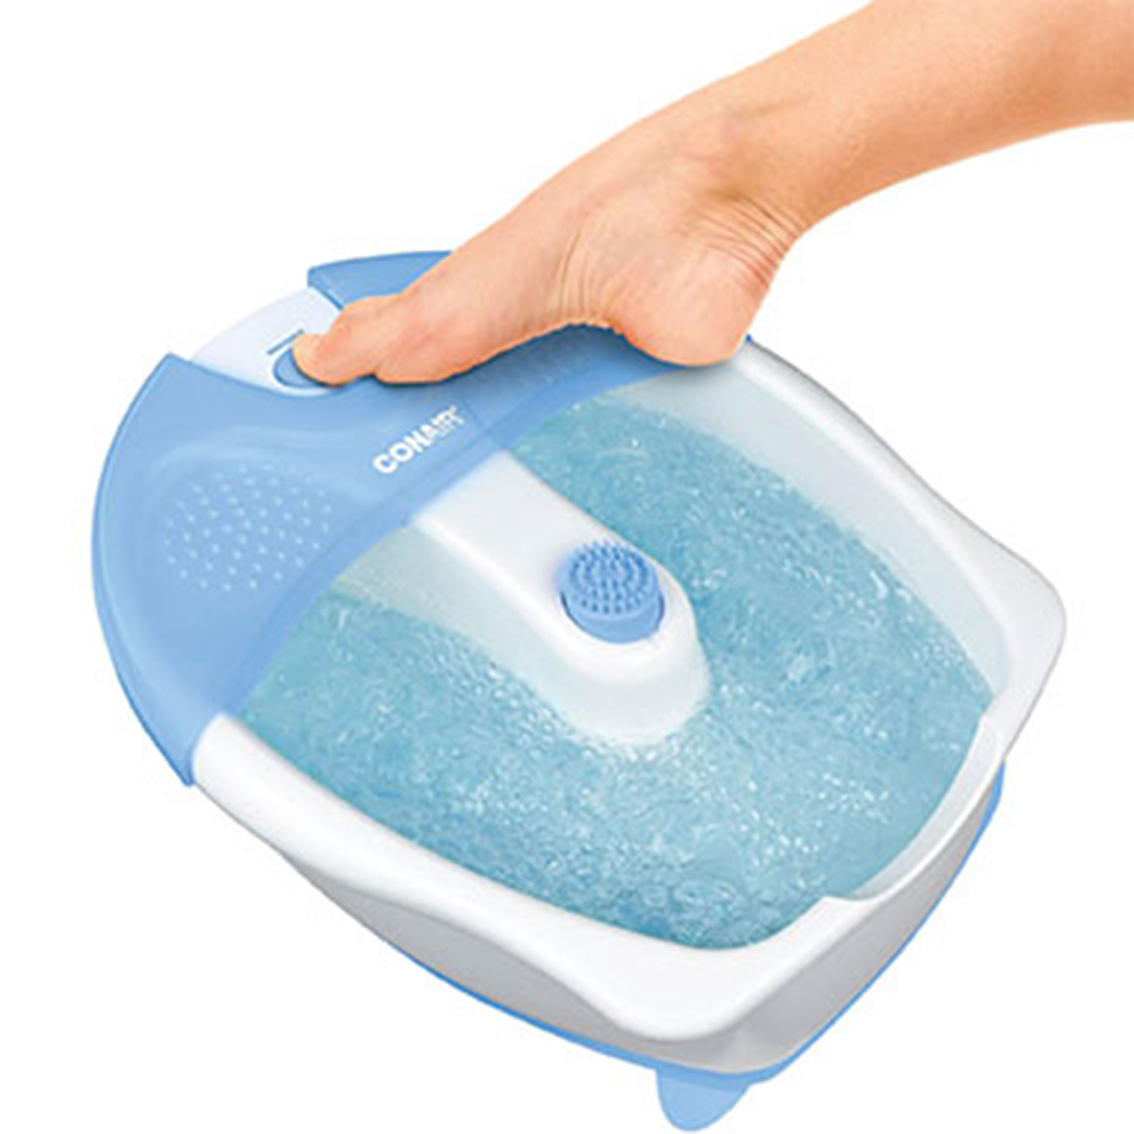 Conair Foot Bath with Bubbles and Heat - Image 2 of 2